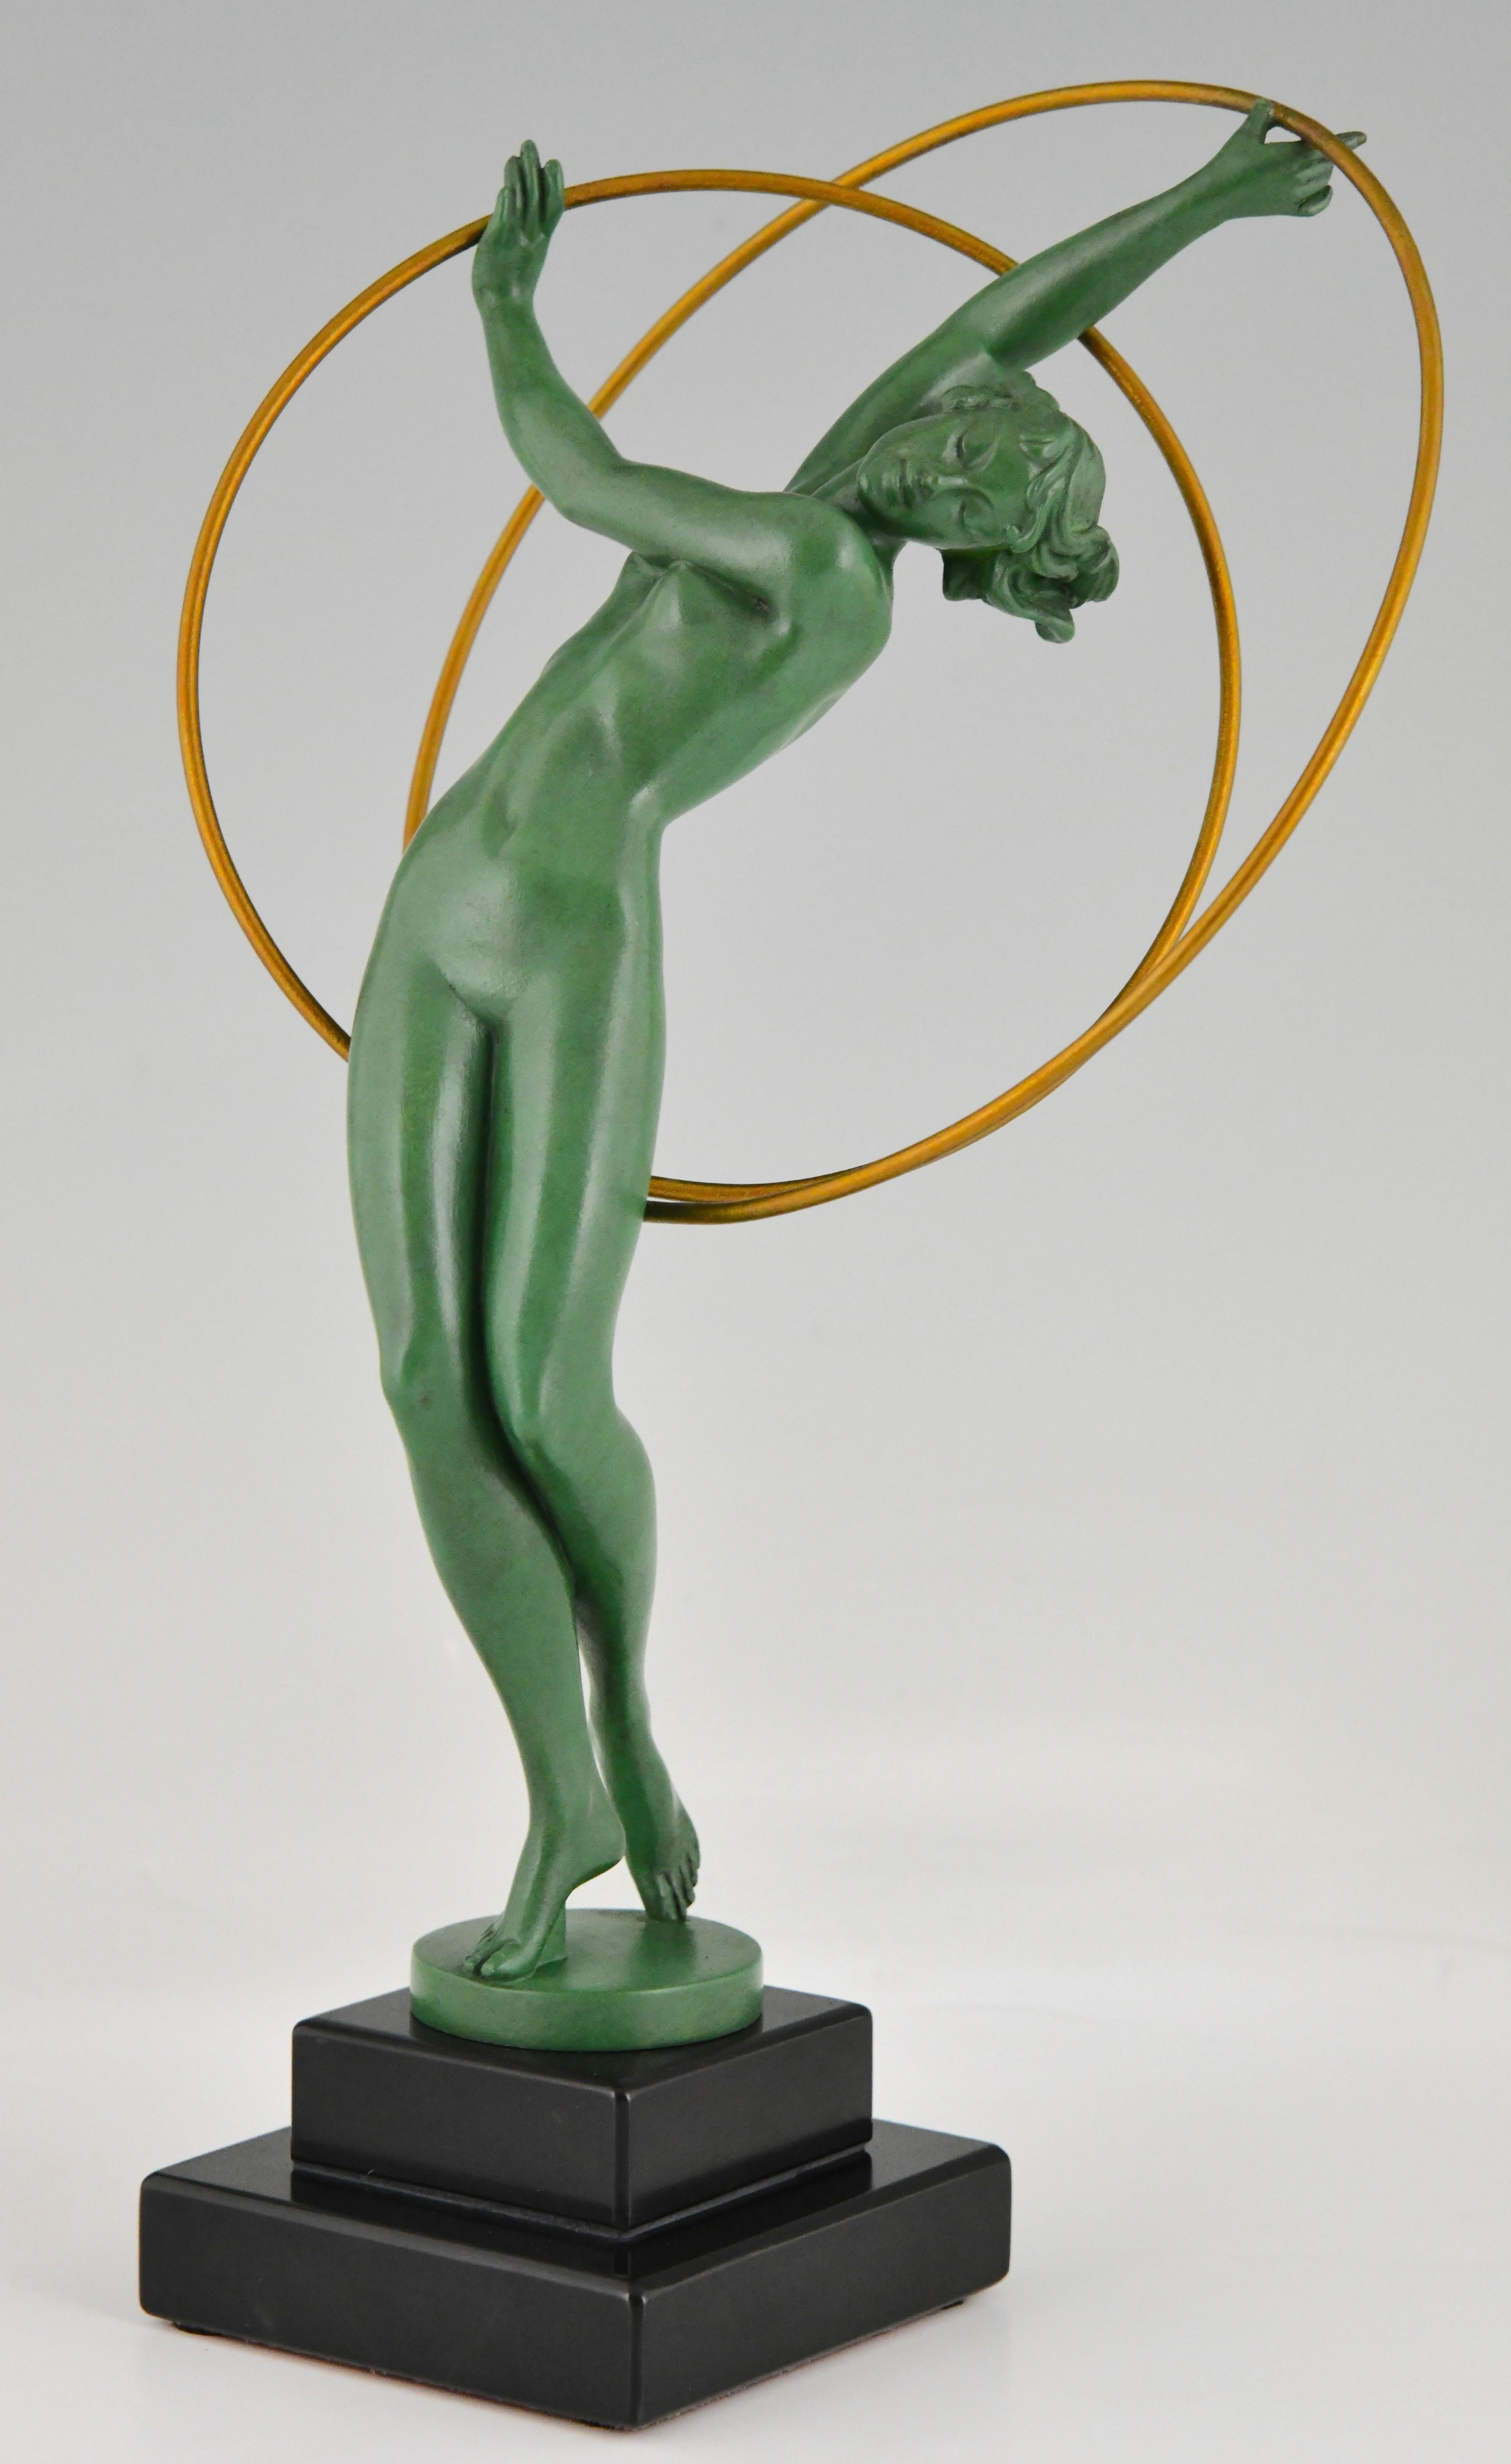 Patinated Art Deco Sculpture Nude Hoop Dancer Signed by Fayral, Pierre Le Faguays 1930